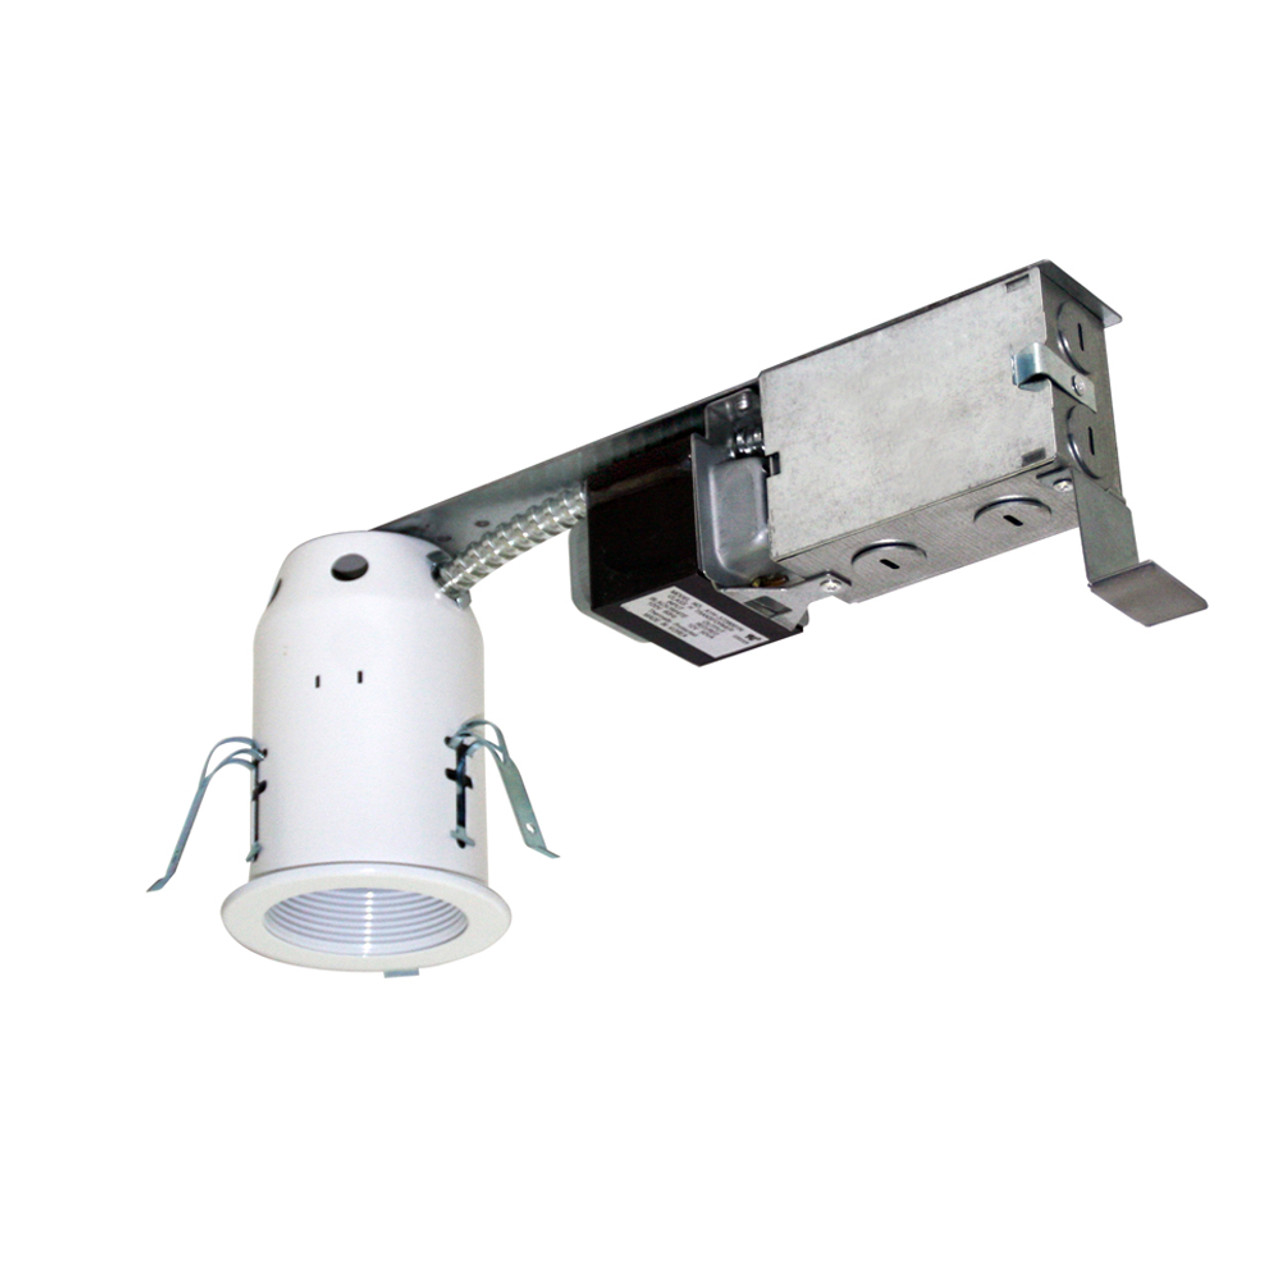 JESCO Lighting LV3001R 3" Low Voltage Non-IC Housing for Remodel, Silver